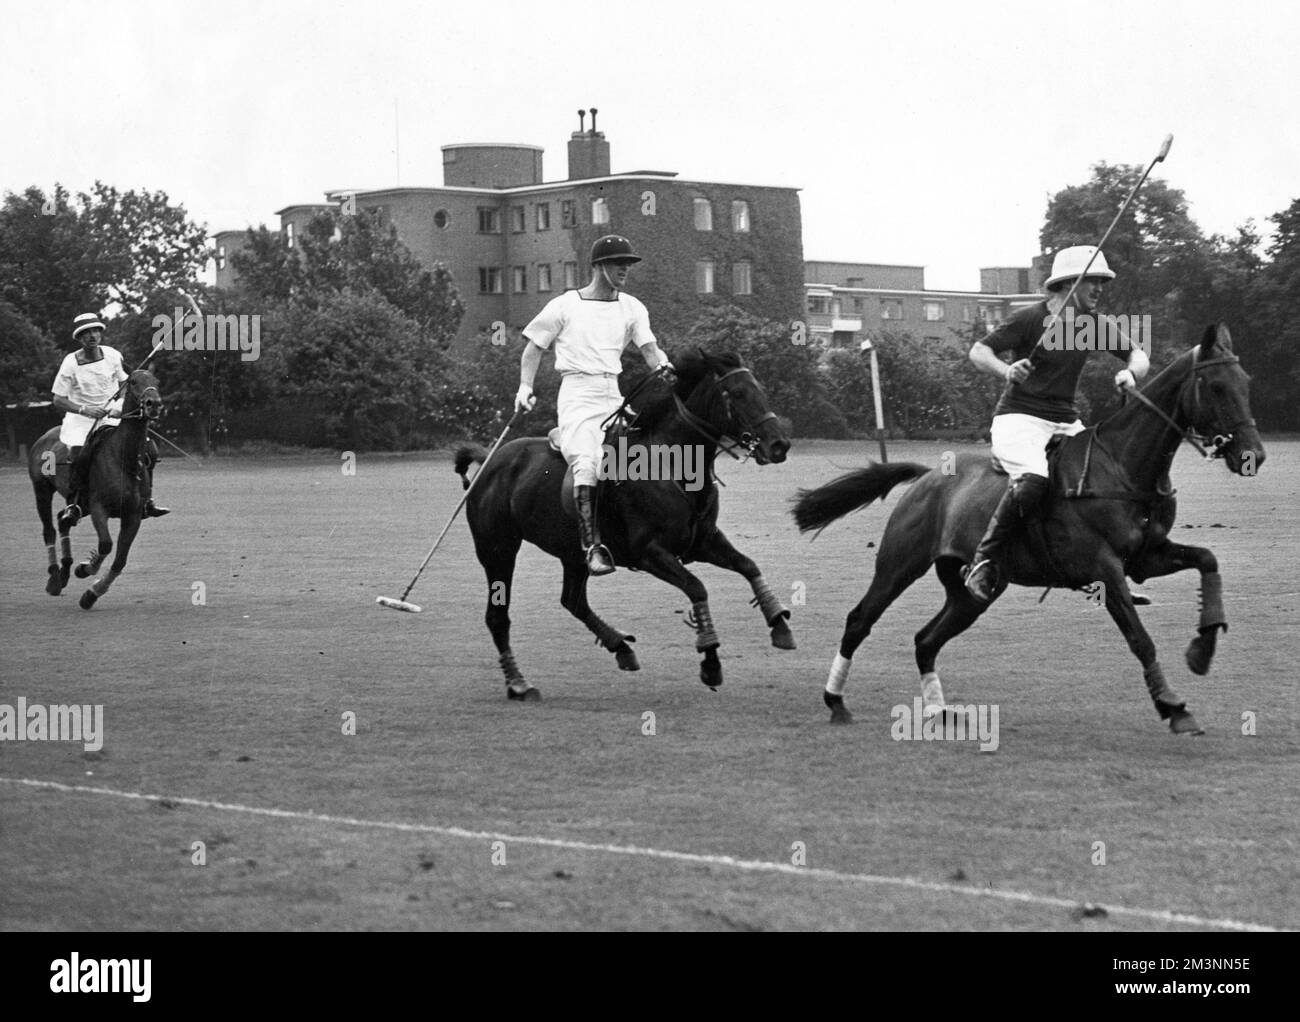 The quarter finals of the Polo County cup at Roehampton in July 1954 with Prince Philip, Duke of Edinburgh on the left, playing for the Mariners, following E. Lalor of the Henley team.     Date: 1954 Stock Photo